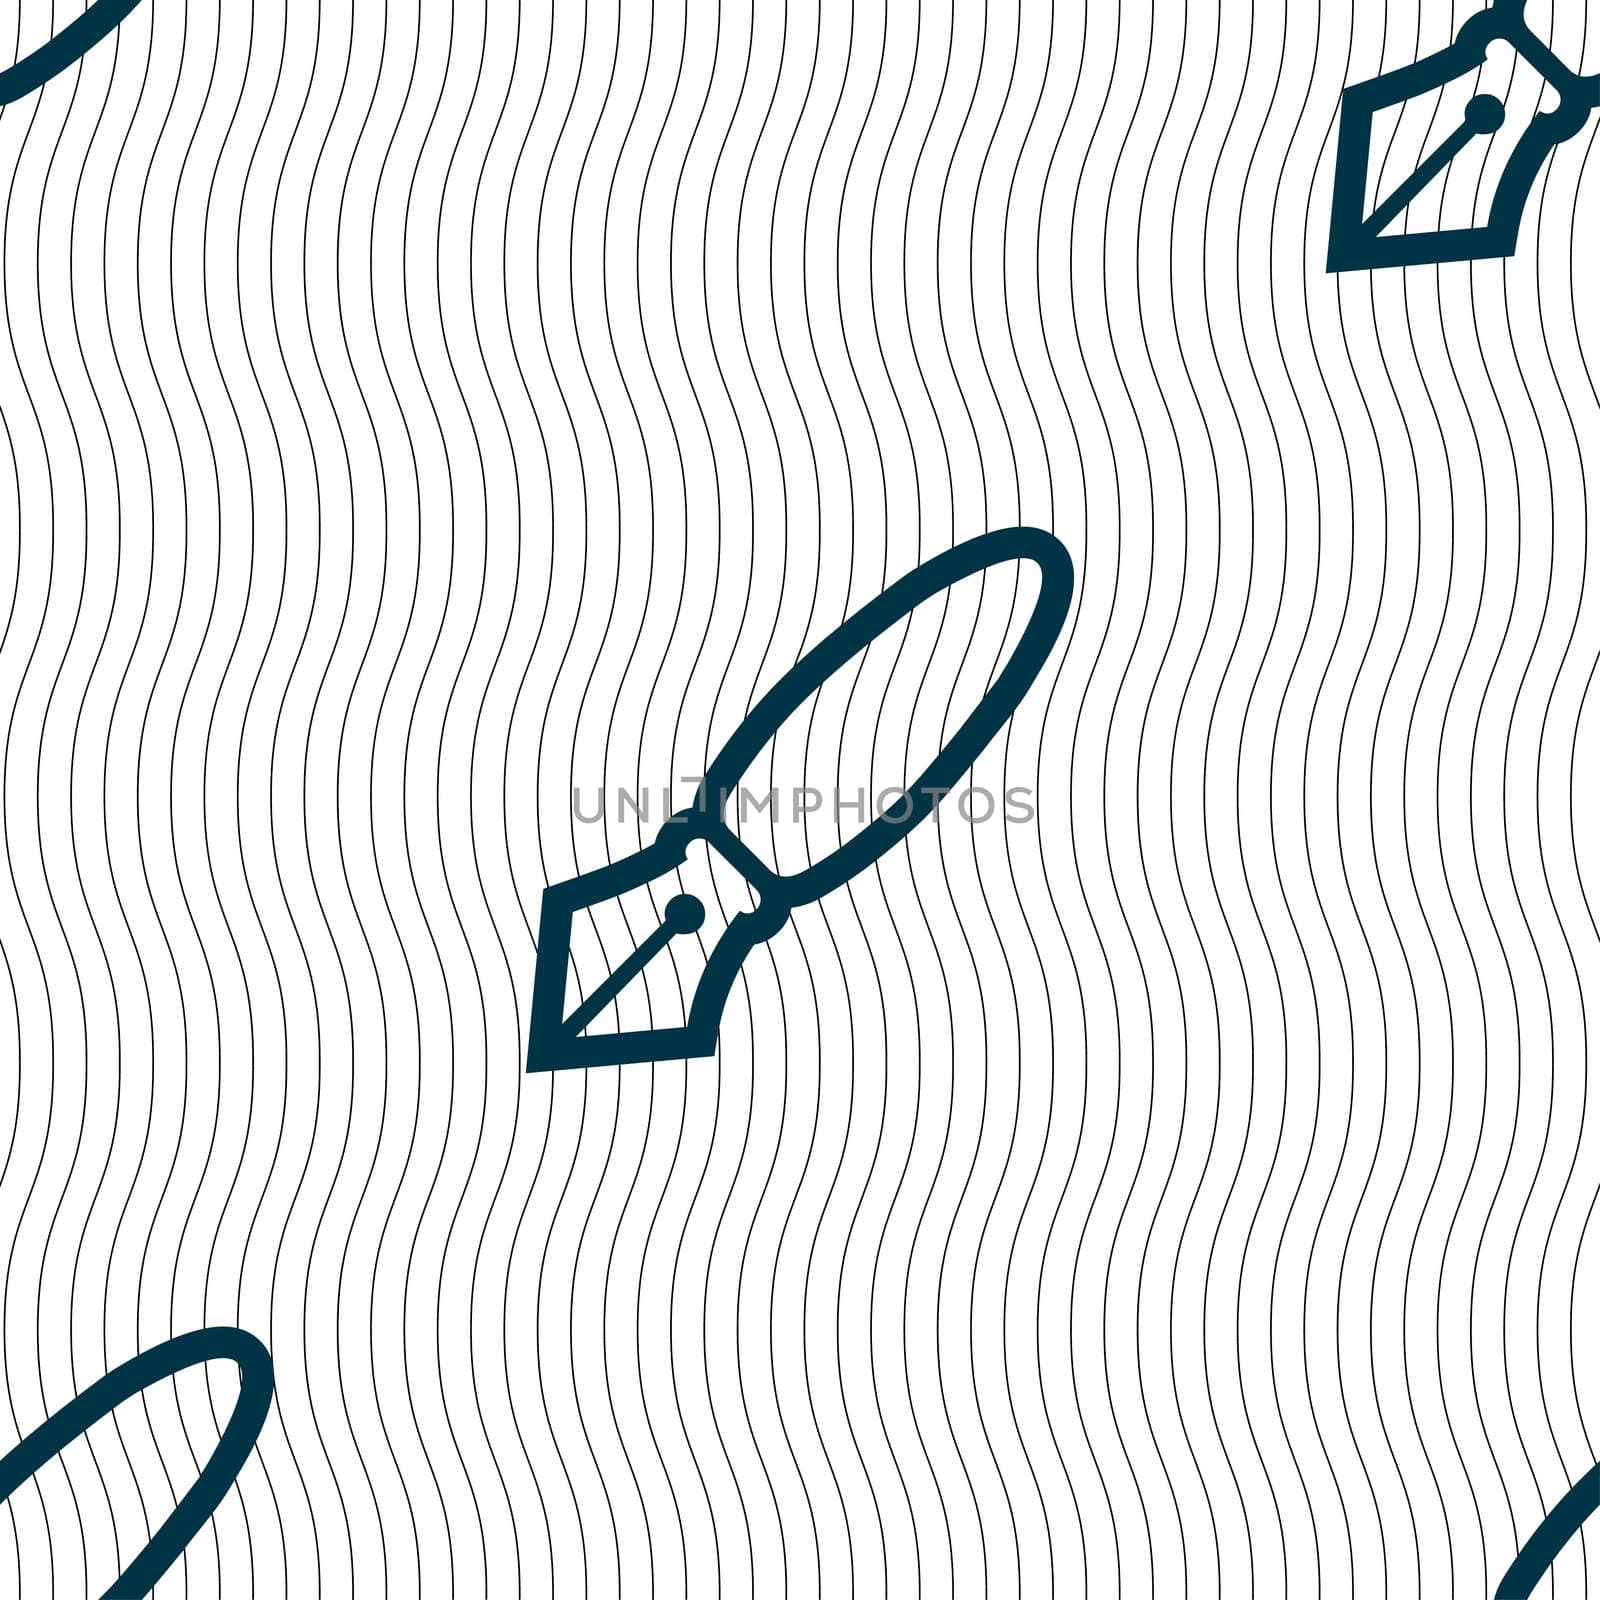 Pen icon sign. Seamless pattern with geometric texture. illustration